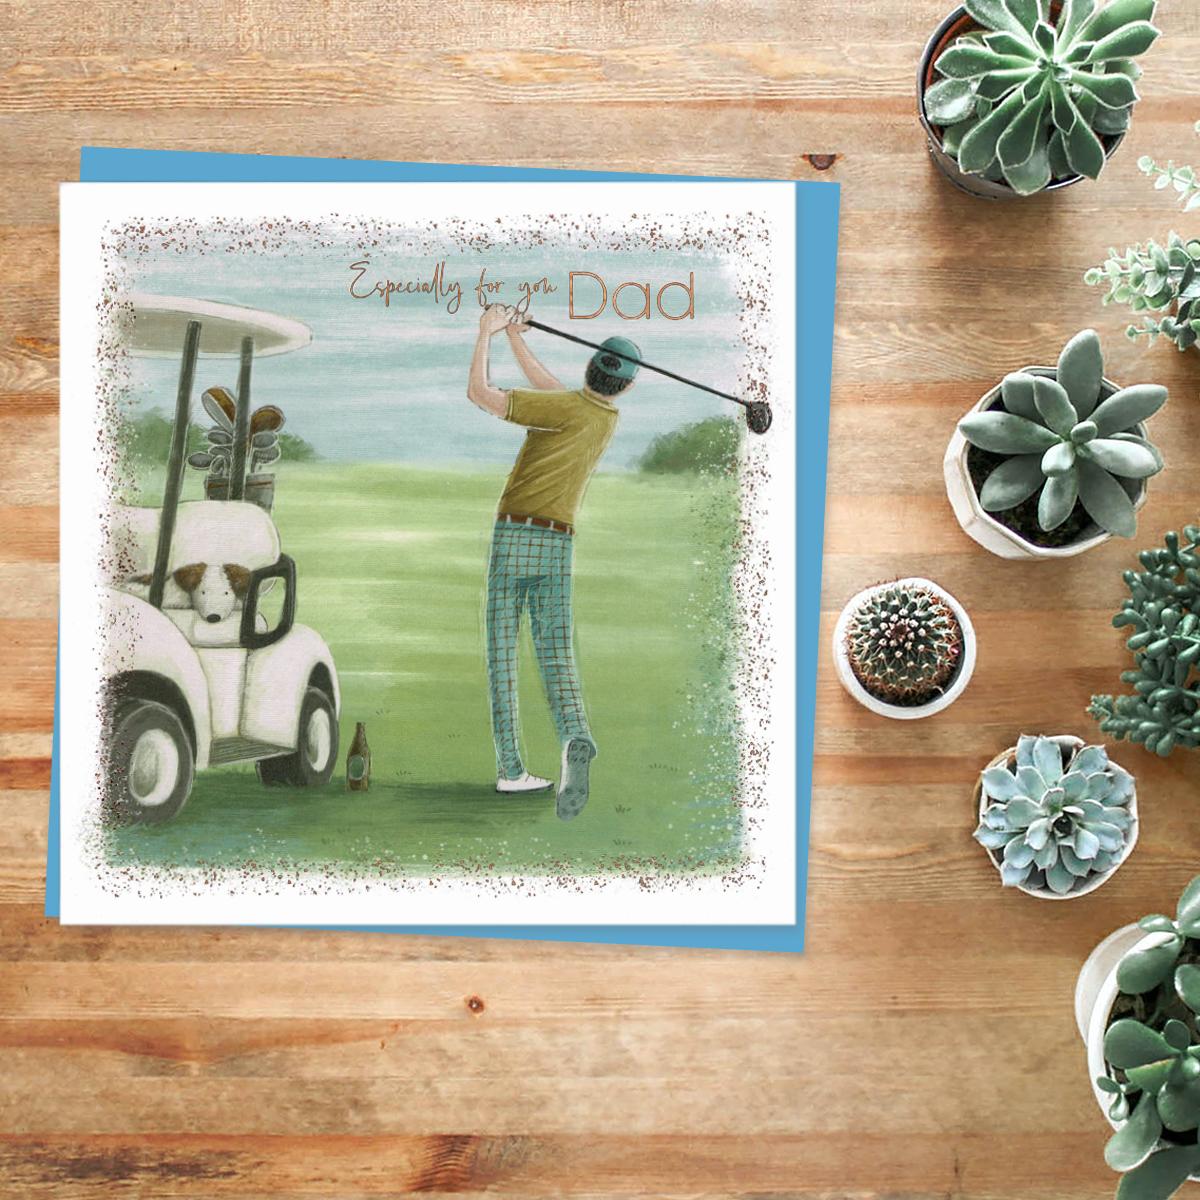 'Especially For You Dad' Father's Day Card Featuring A Golfer With Golf Cart And Dog! Complete With Copper Sparkle And Blue Envelope